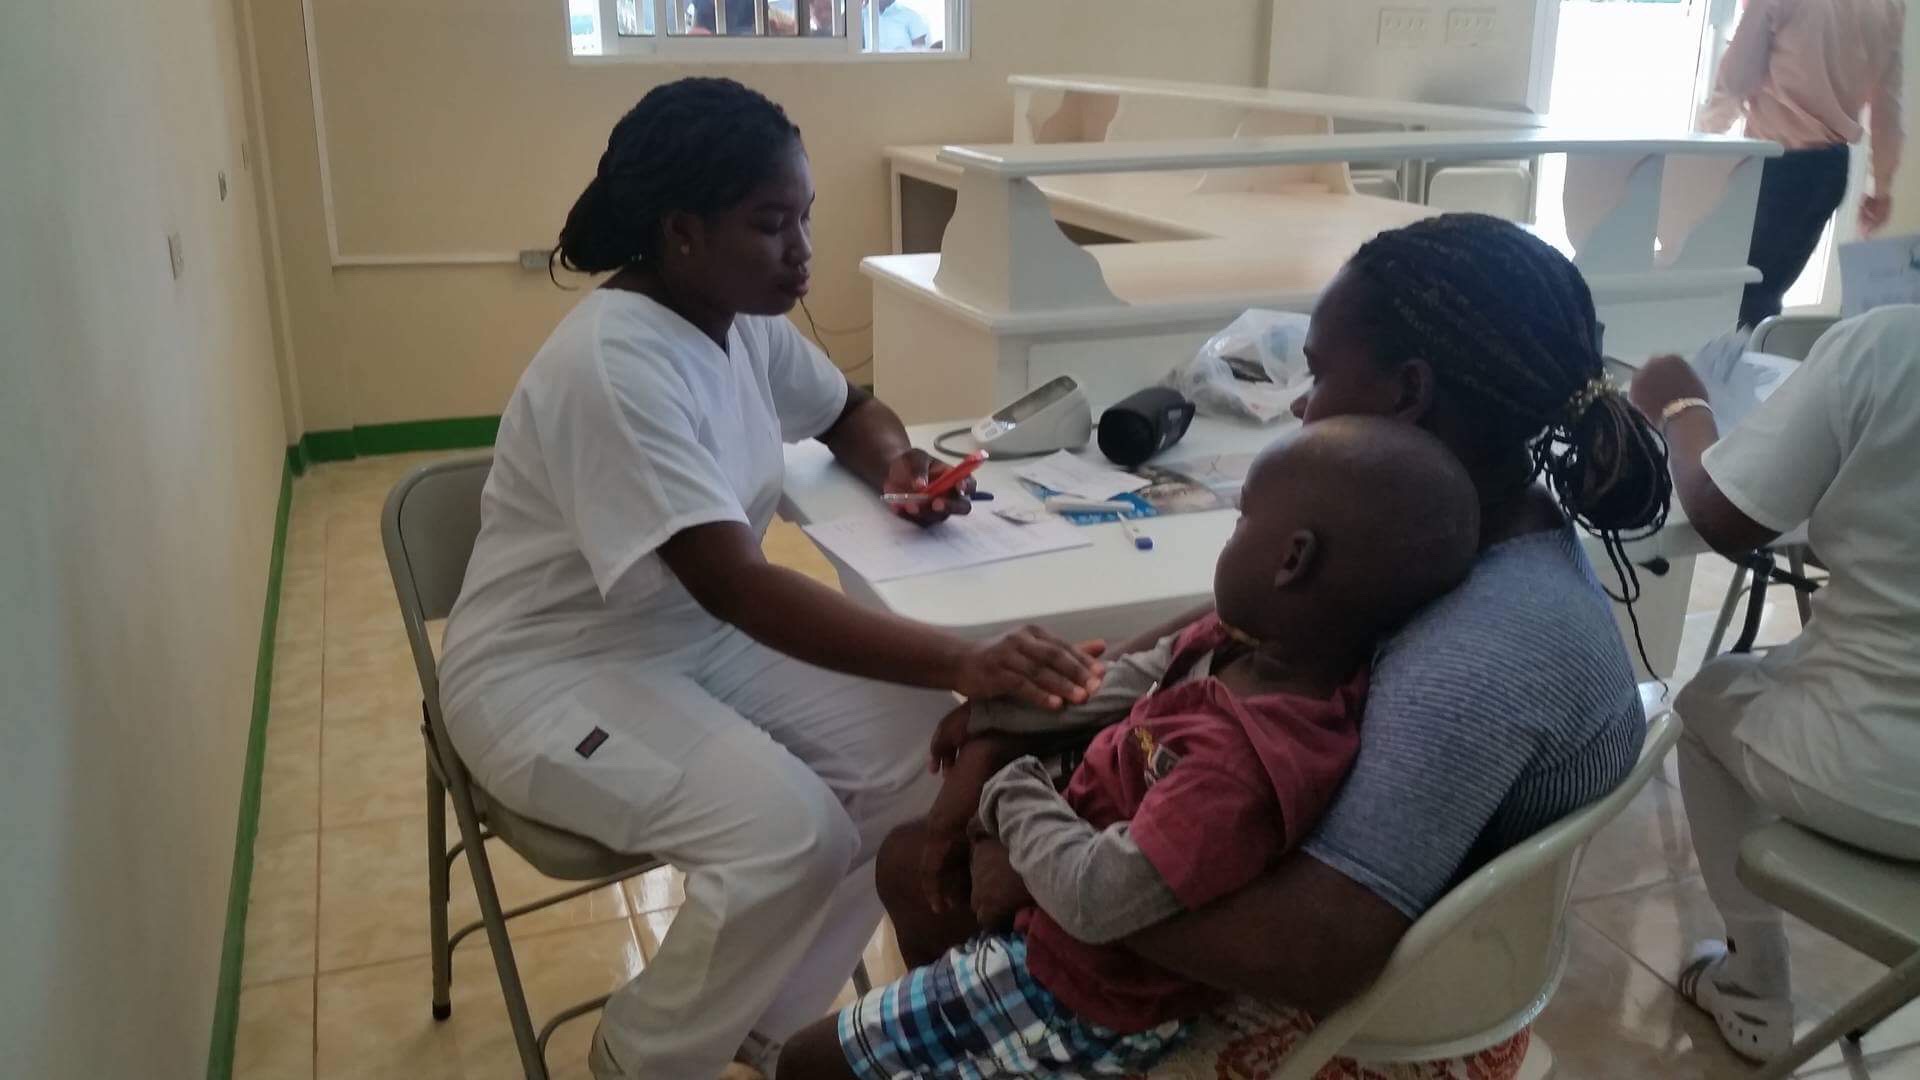  A young child receives medical care at the newly opened CHIDA Hospital in Cap Haitien, Haiti 